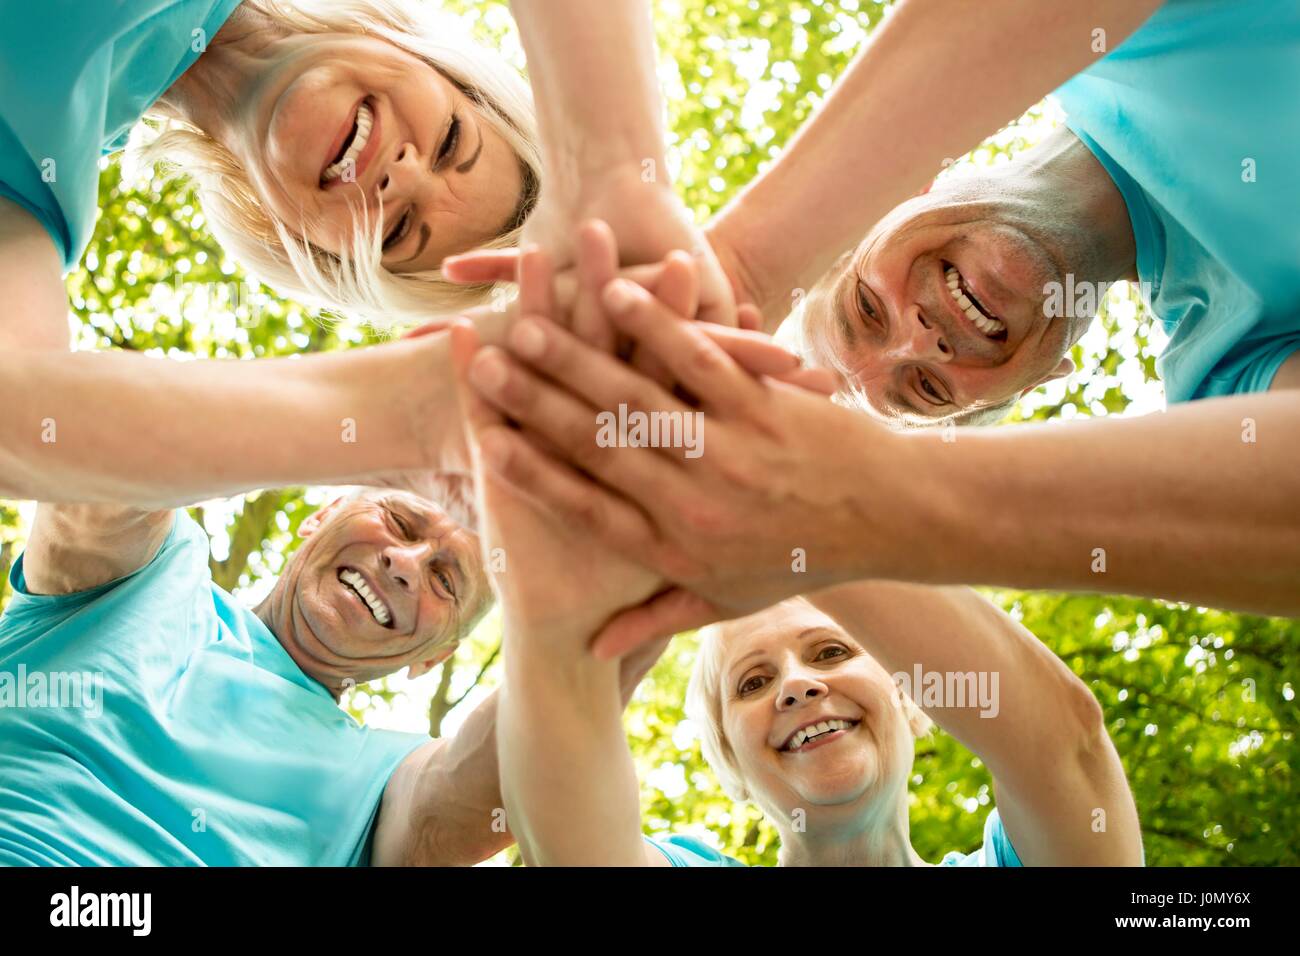 Vier Personen in Gruppe Unordnung, Low Angle View. Stockfoto